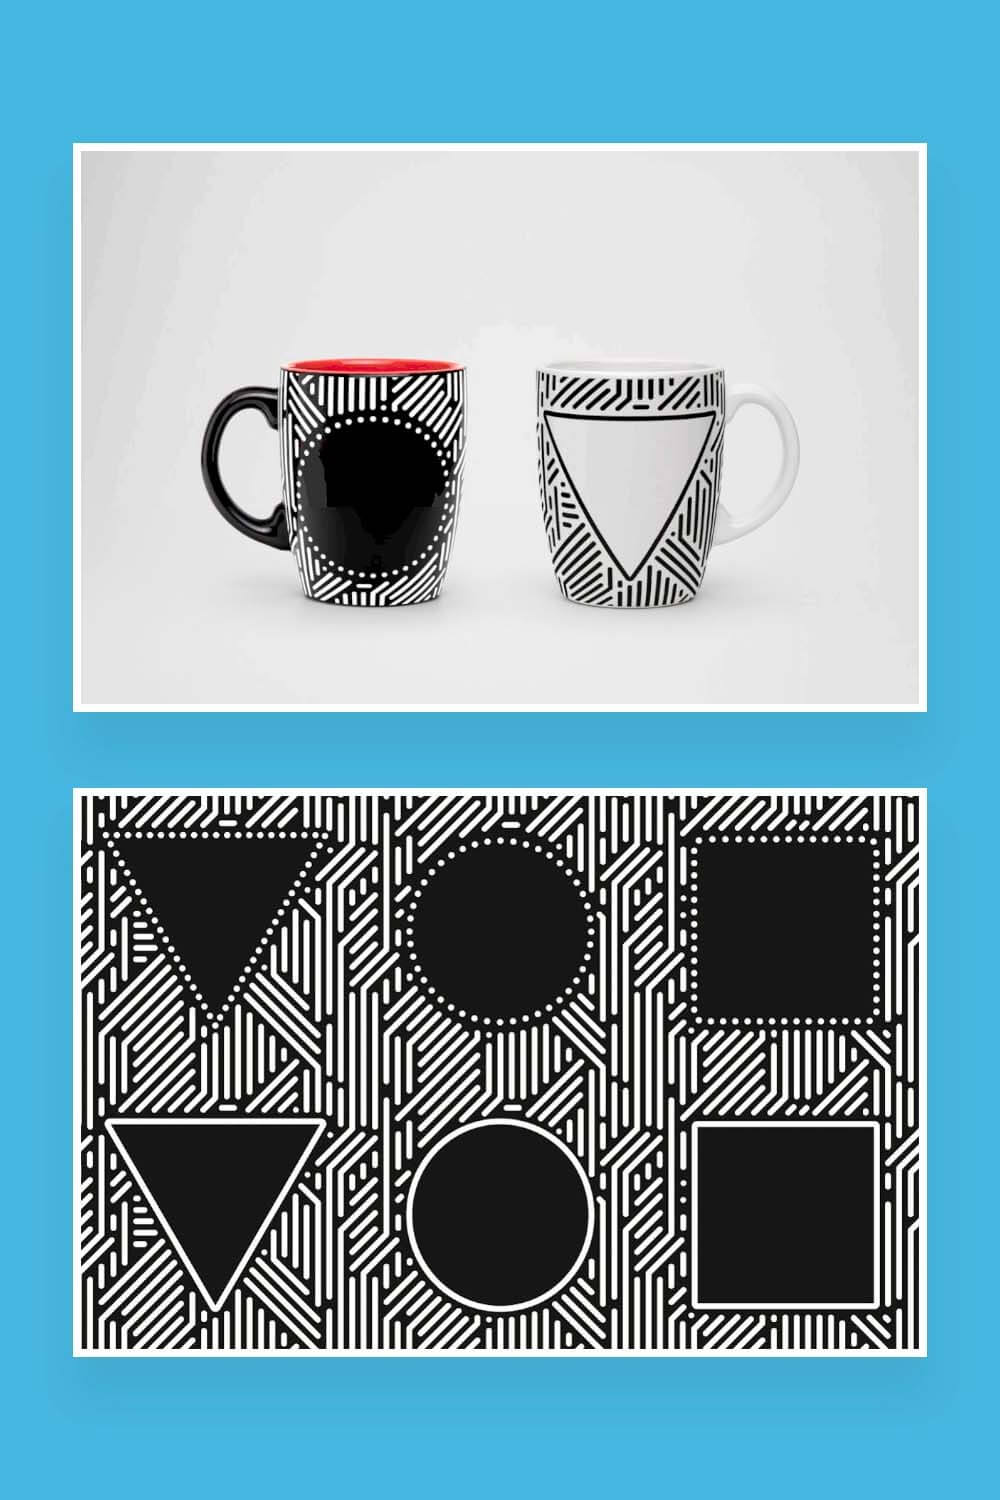 Geometric figures are depicted on the cups and the picture.